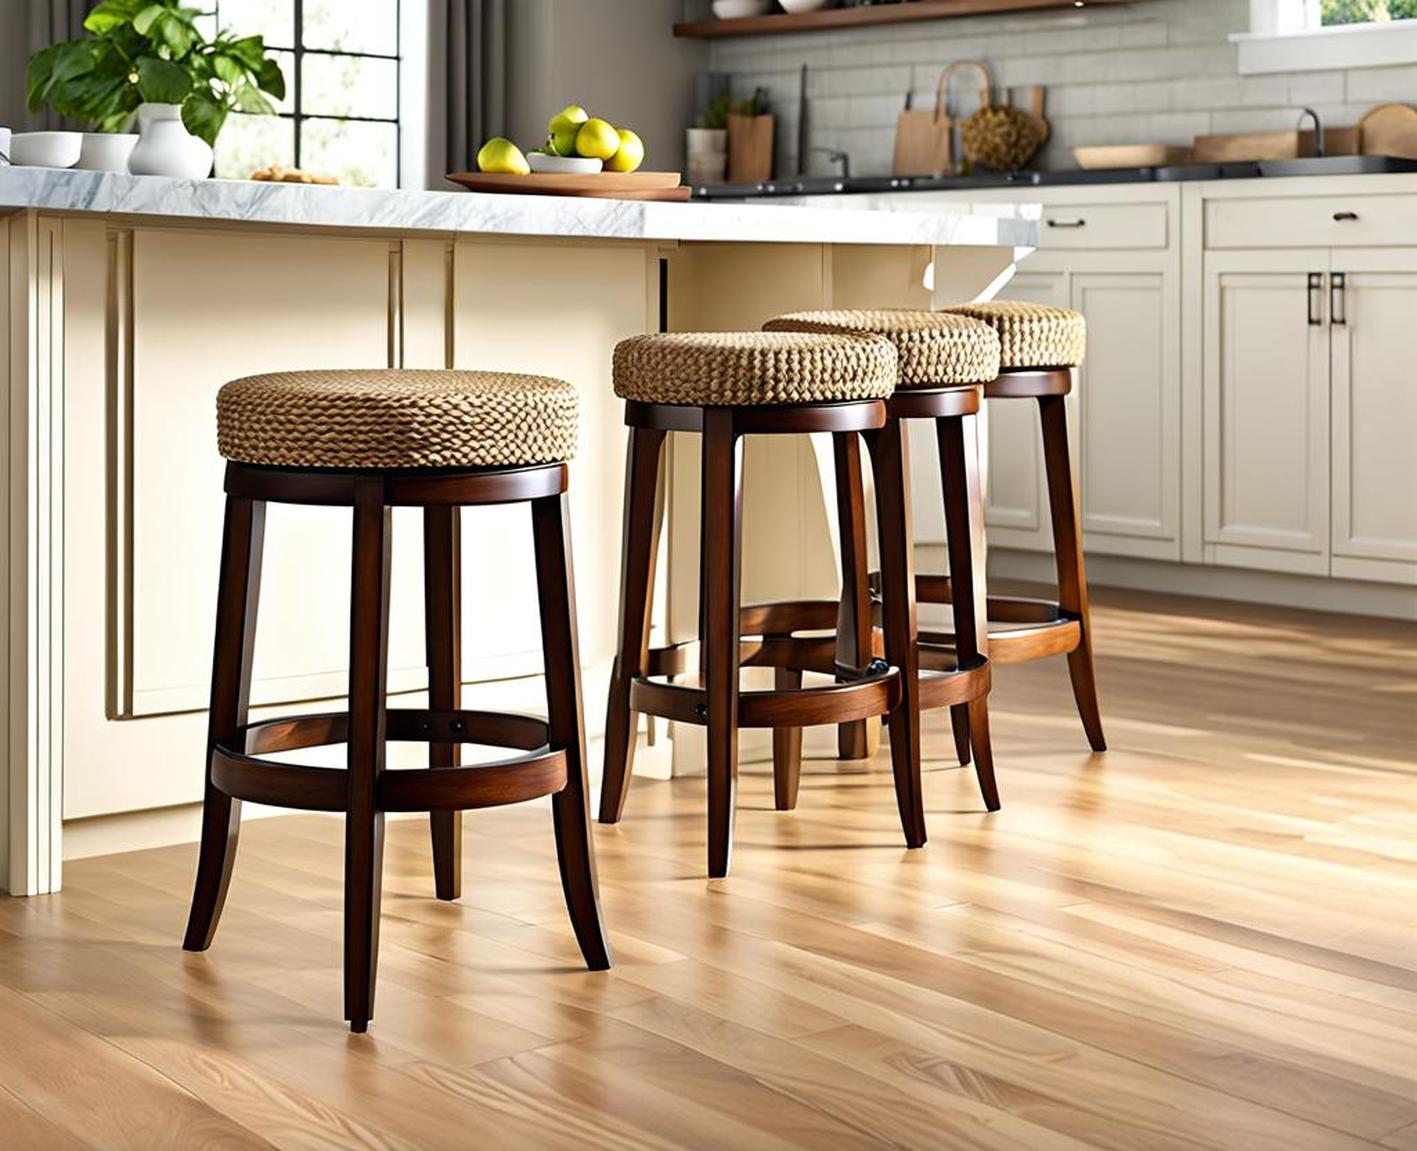 seagrass swivel counter stools